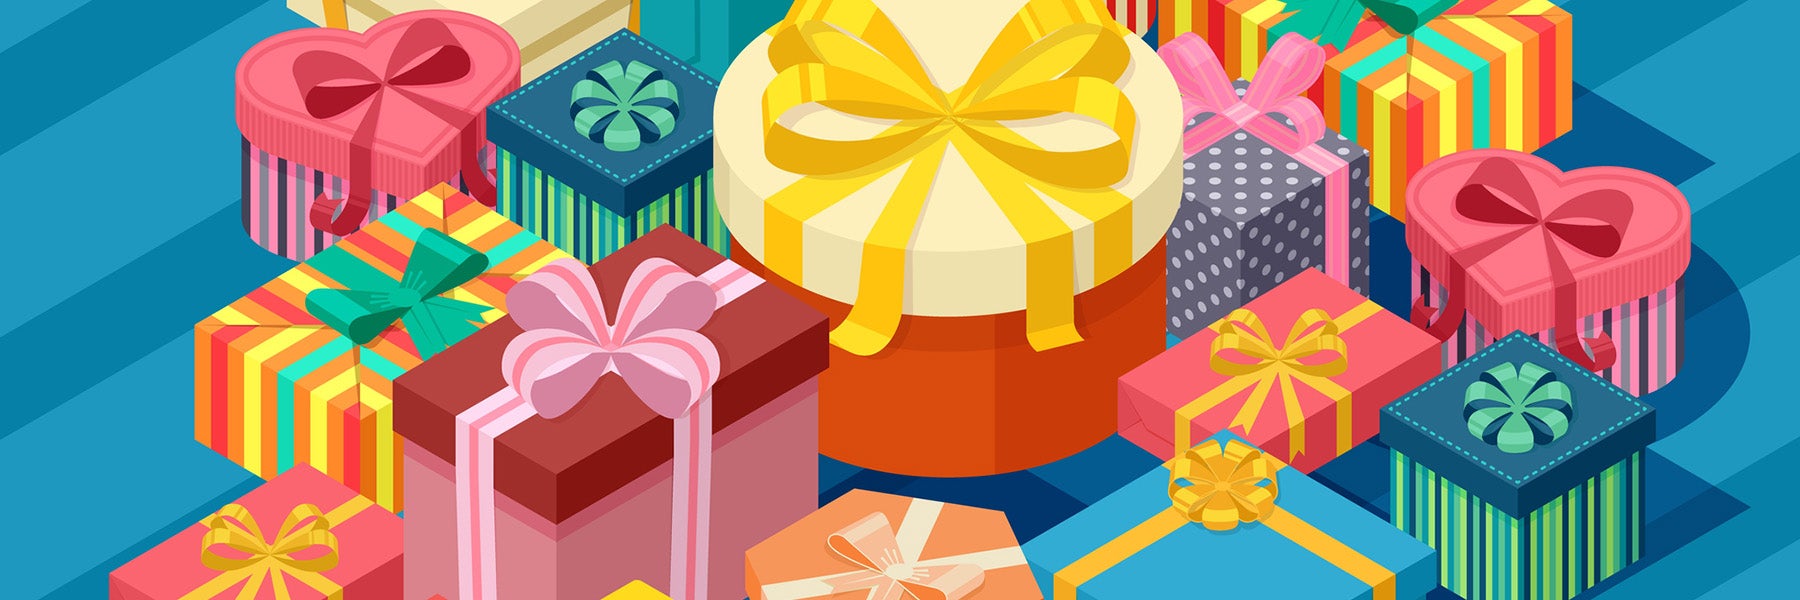 Assortment of isometric present boxes, vector illustration. Many different gift packages decorated with colorful wrapping paper and ribbons. Birthday present, christmas gift, romantic surprise box